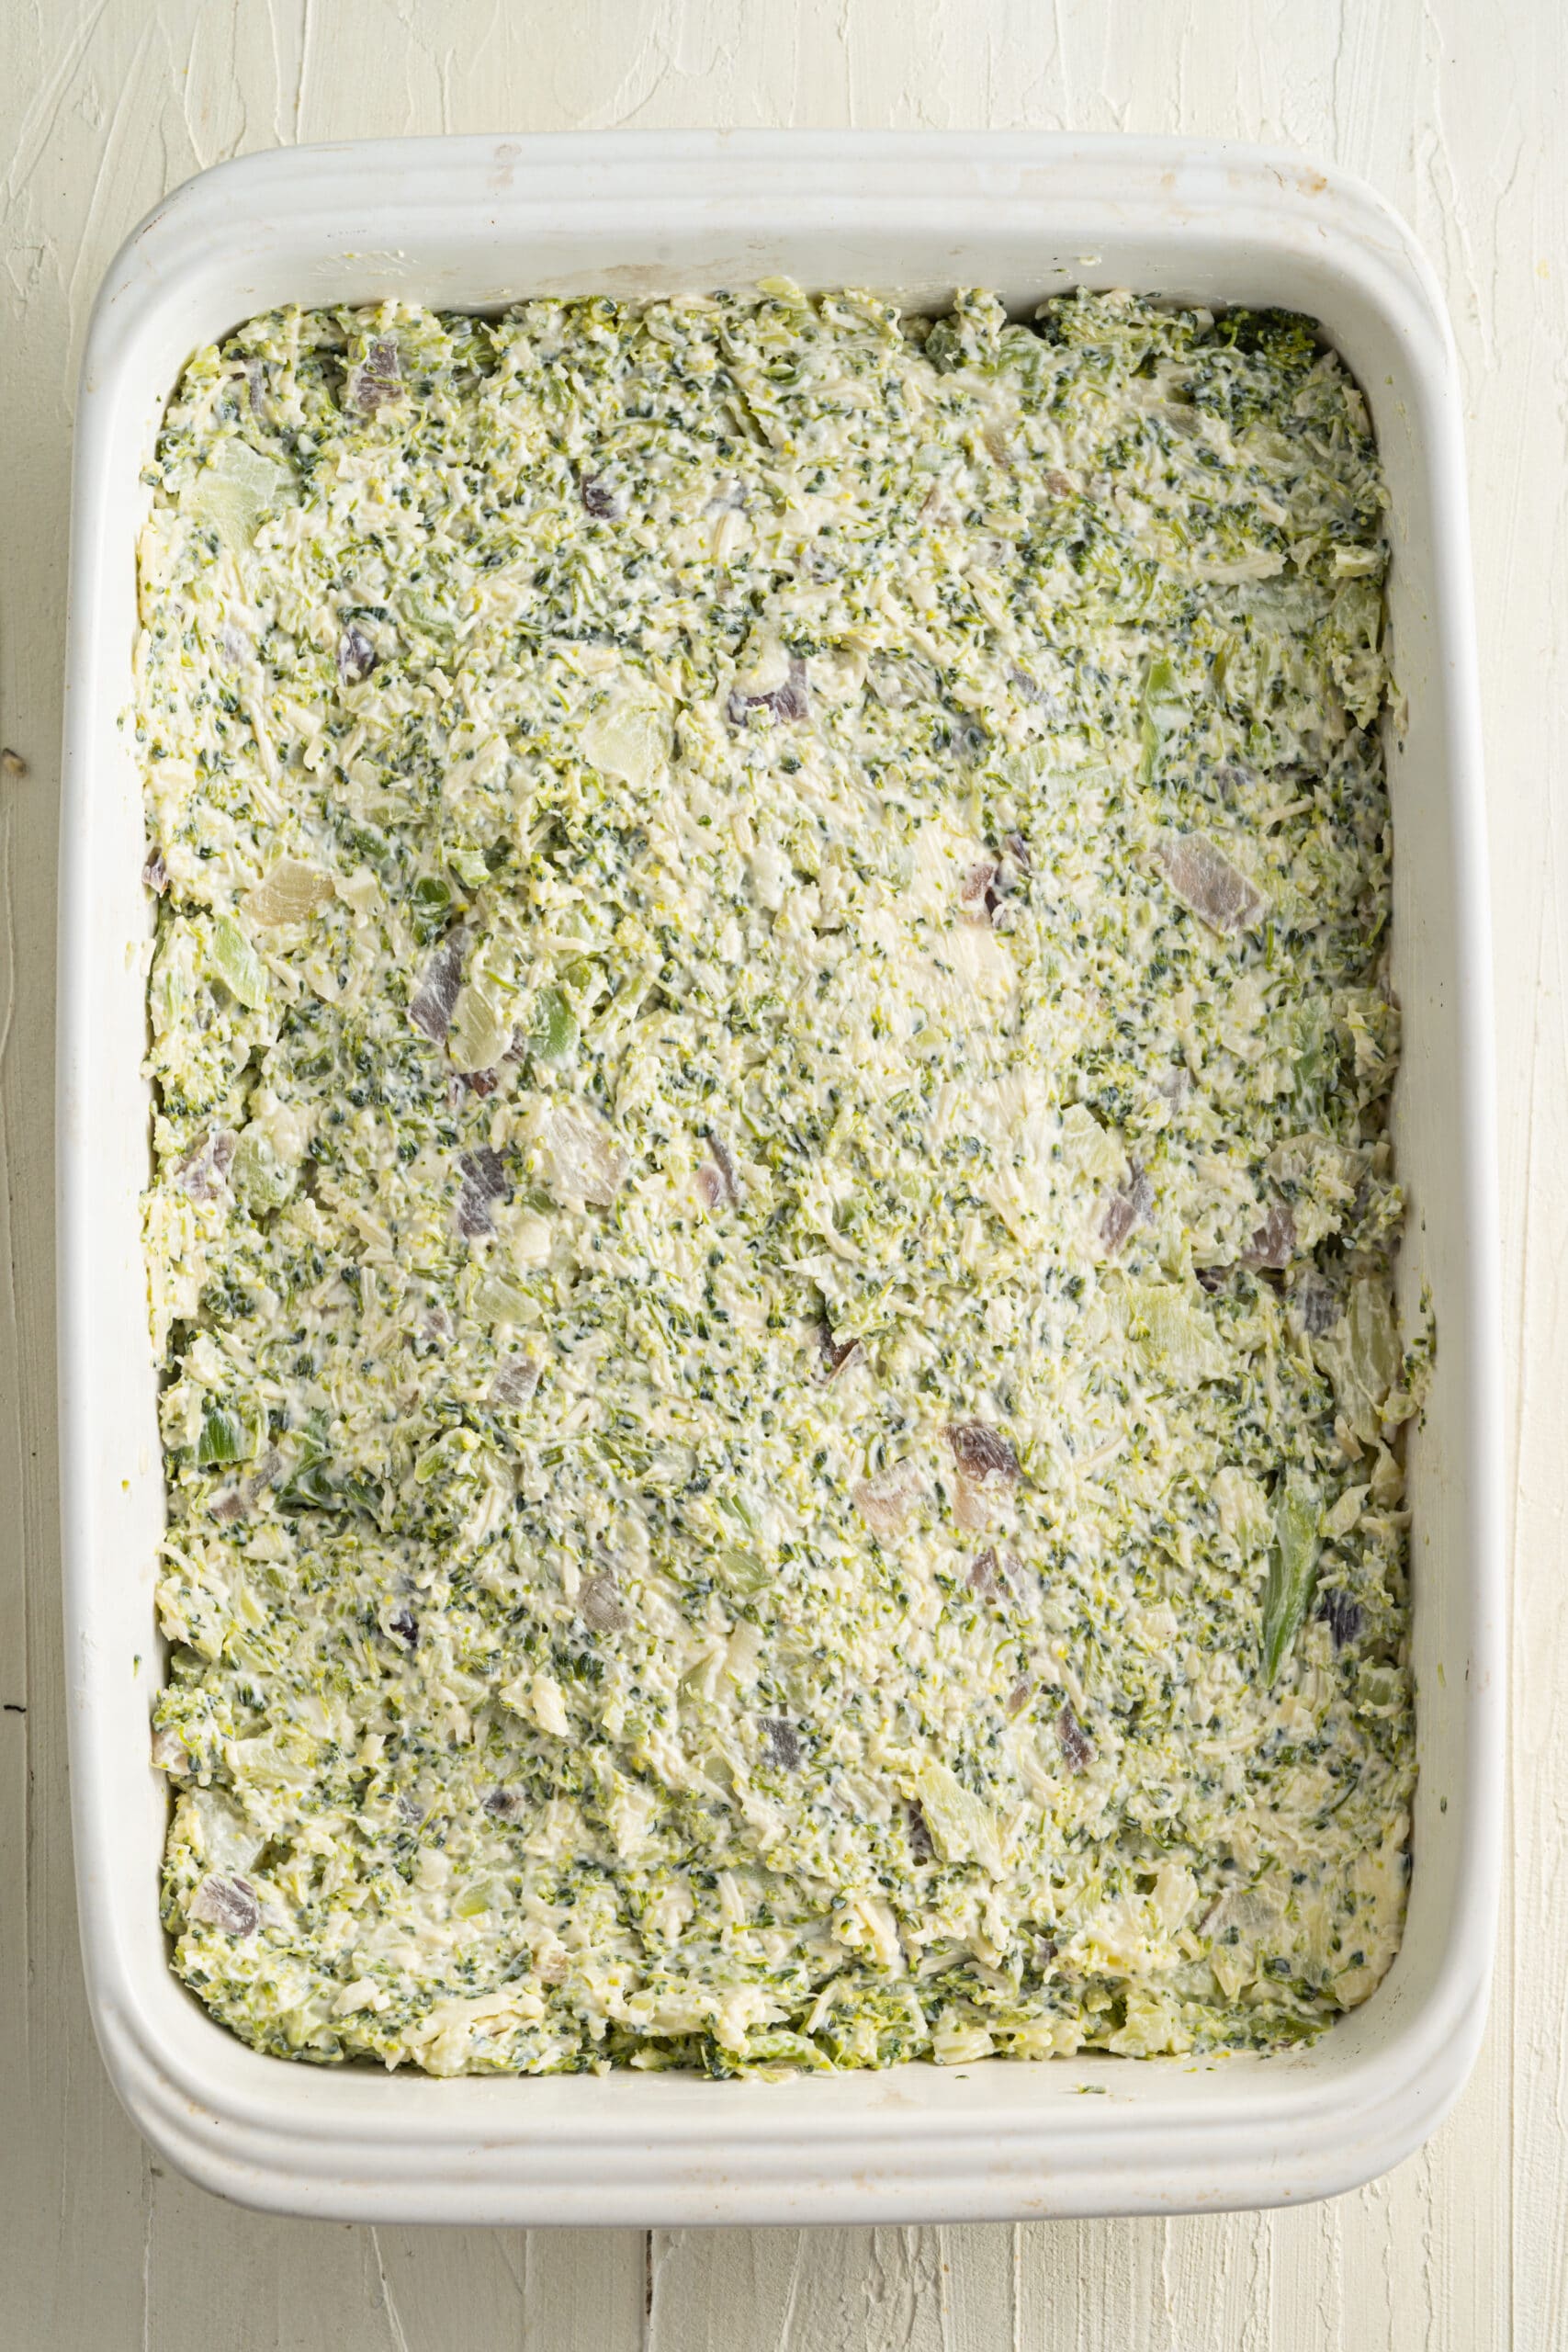 Overhead picture of uncooked broccoli cheese mixture in a white rectangular baking dish.